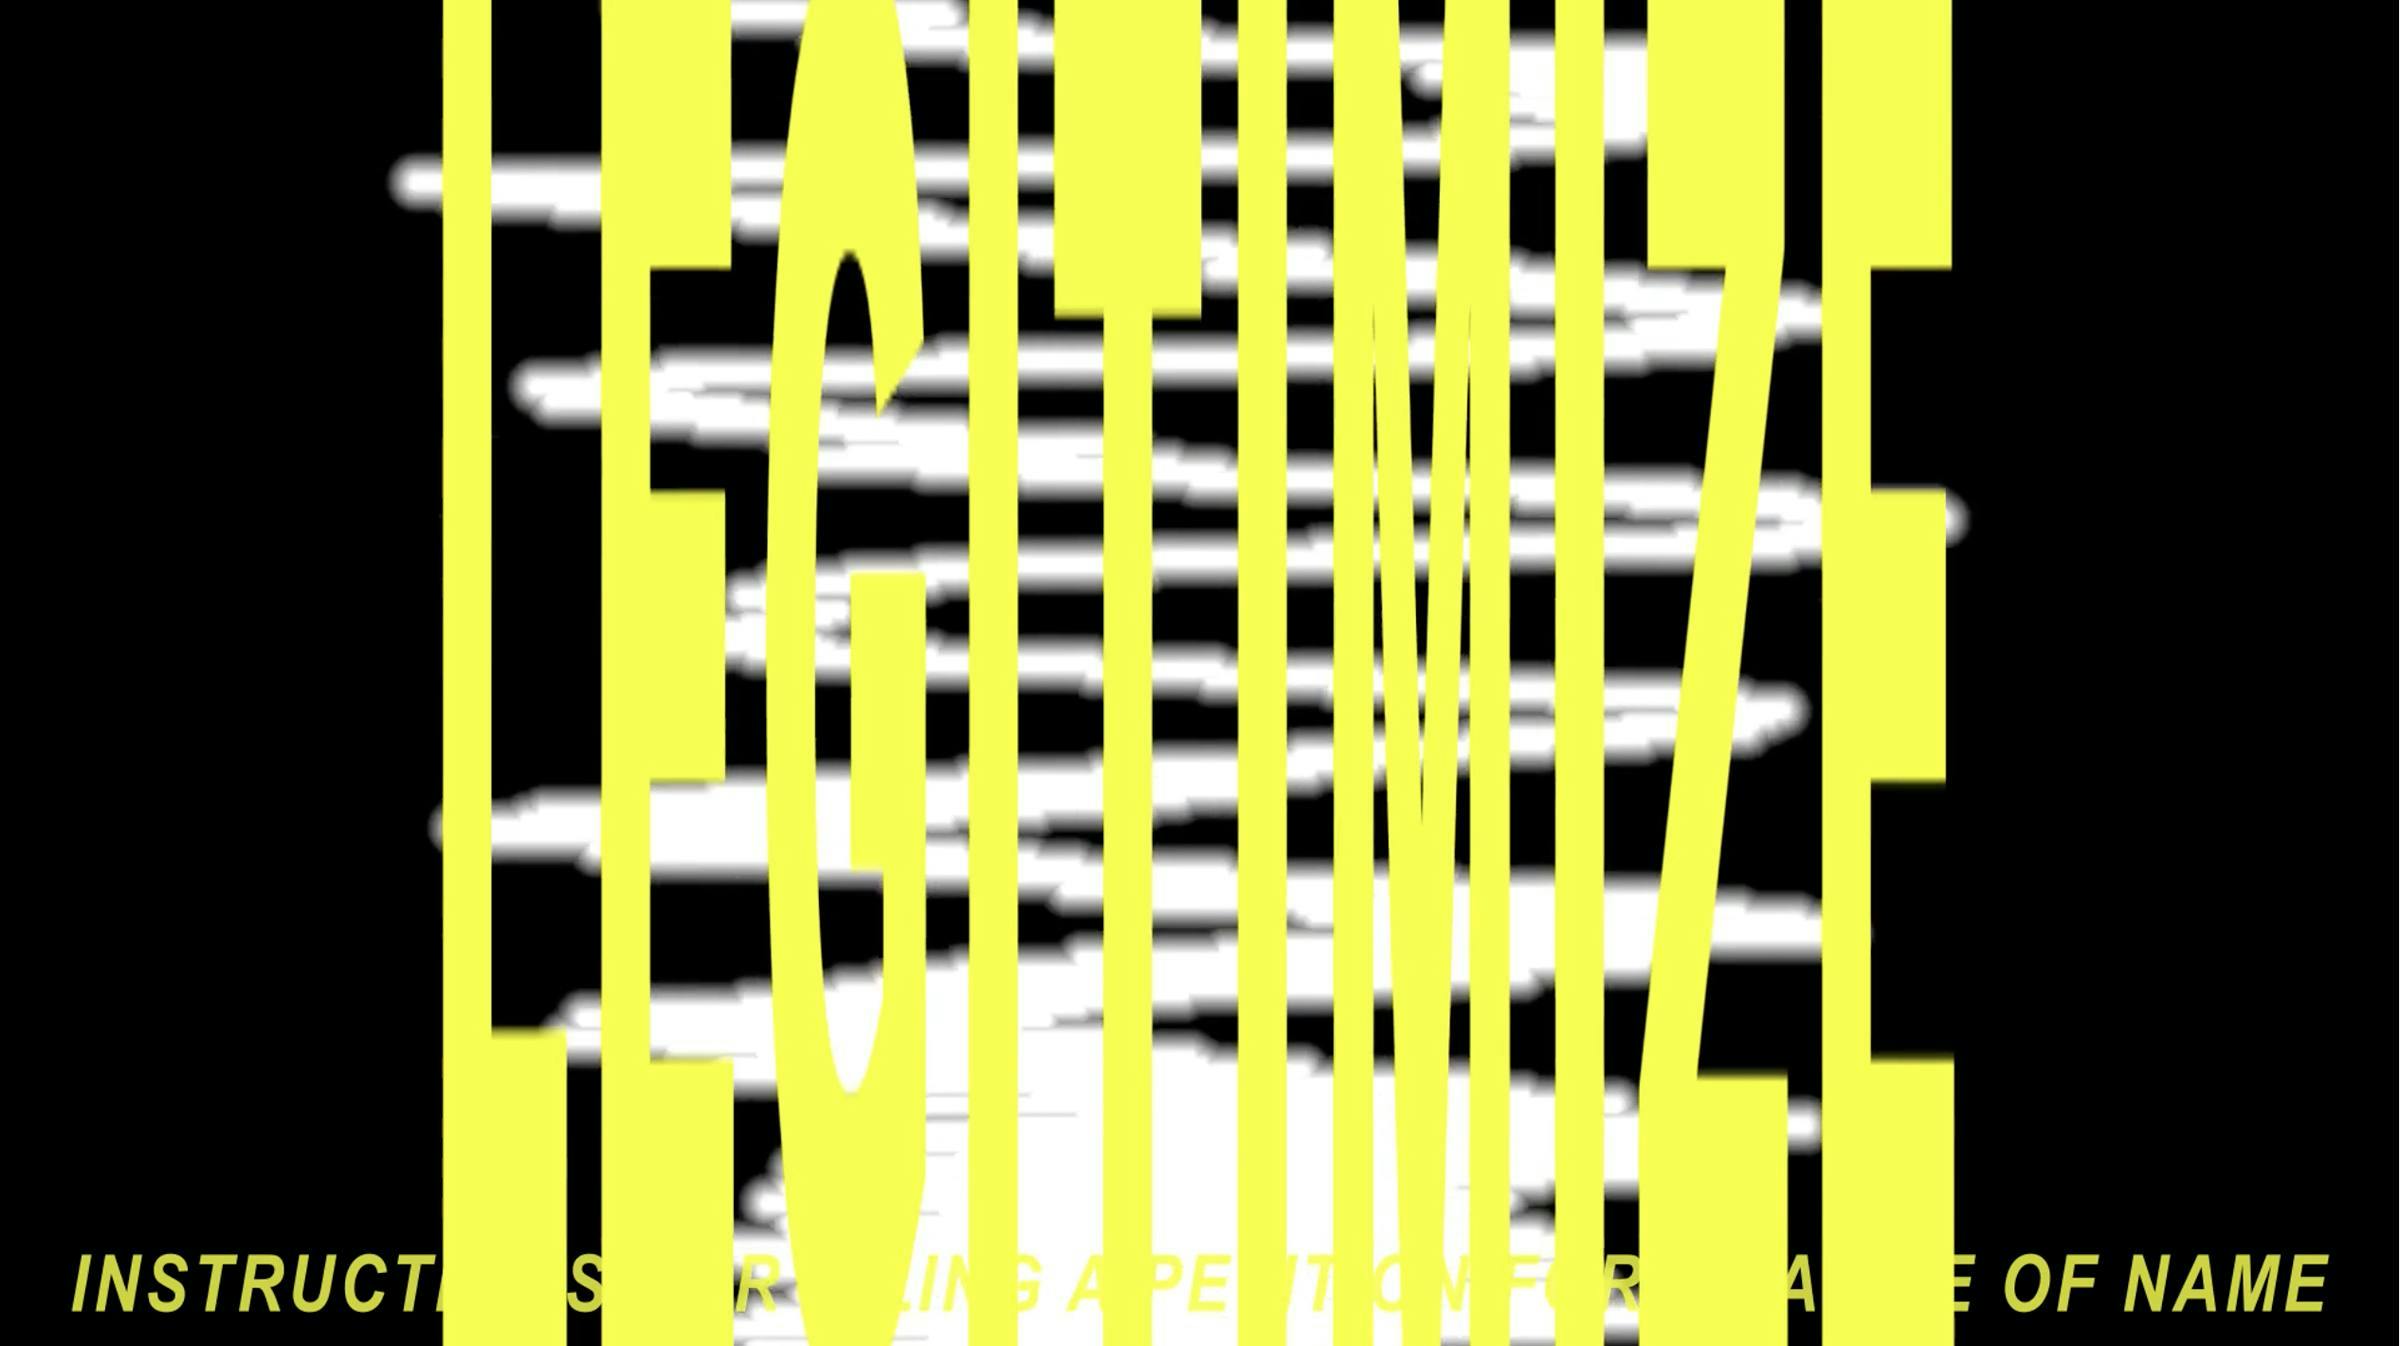 an image of yellow text 'LEGITIMIZE' sits on top of a white visualization of sound. The background is black.